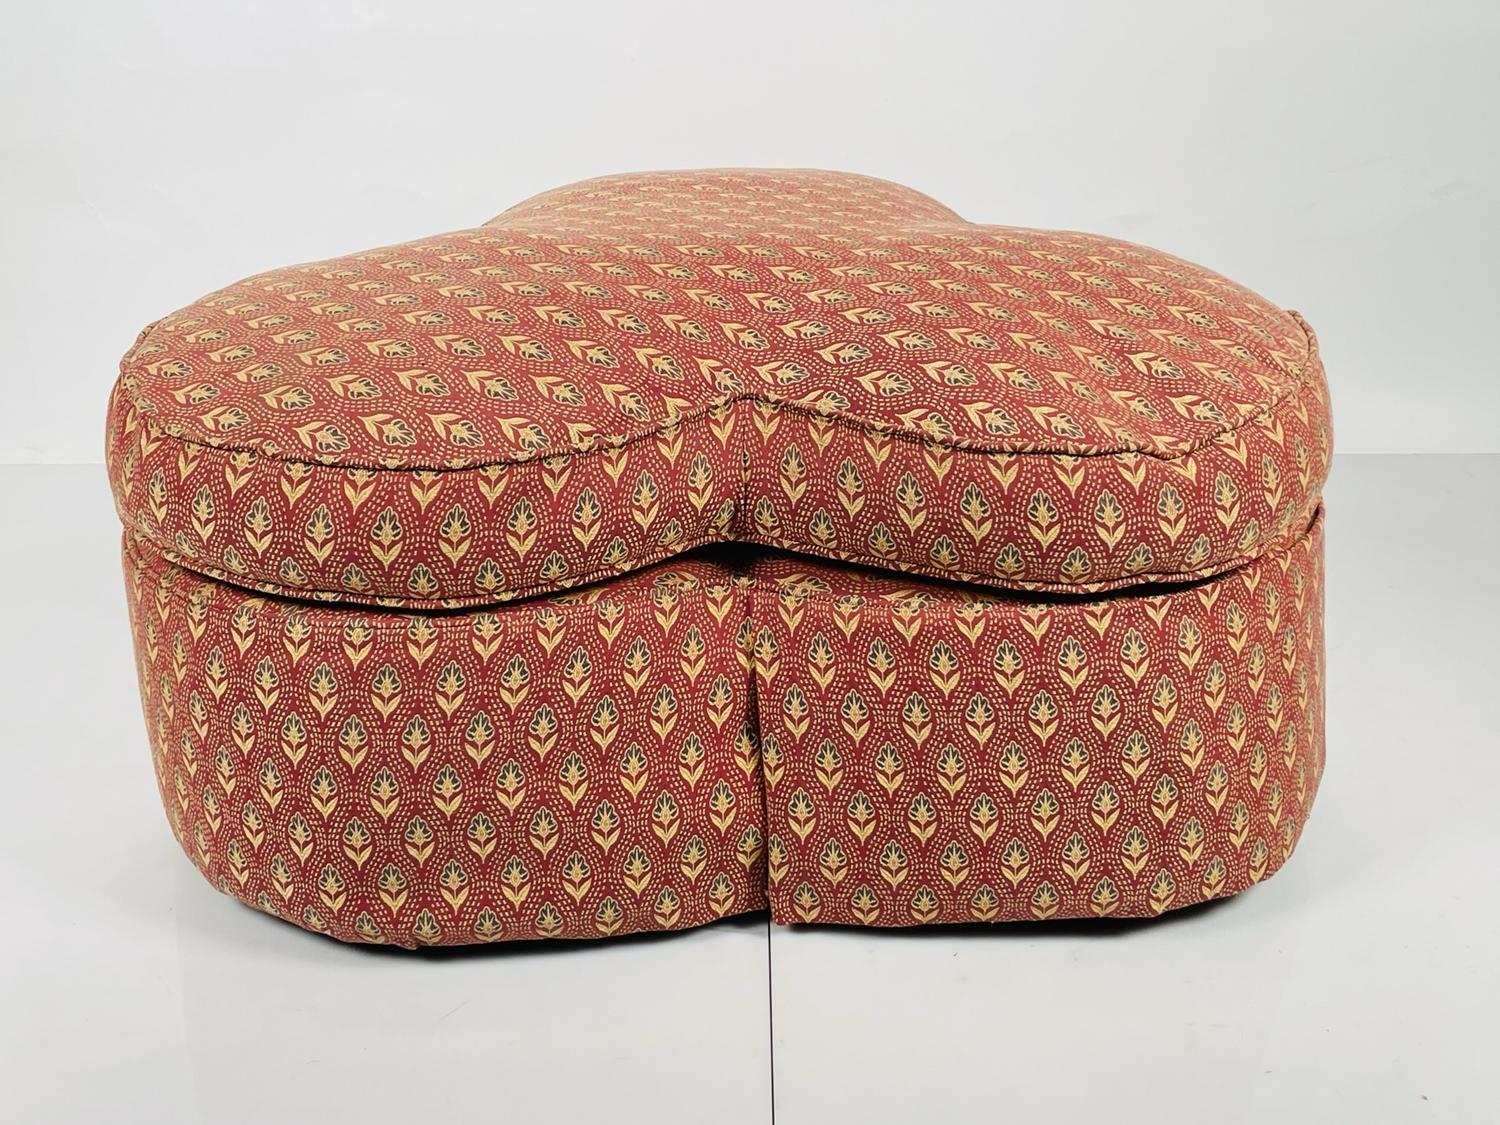 Contemporary Cloverleaf Pouffe by George Smith